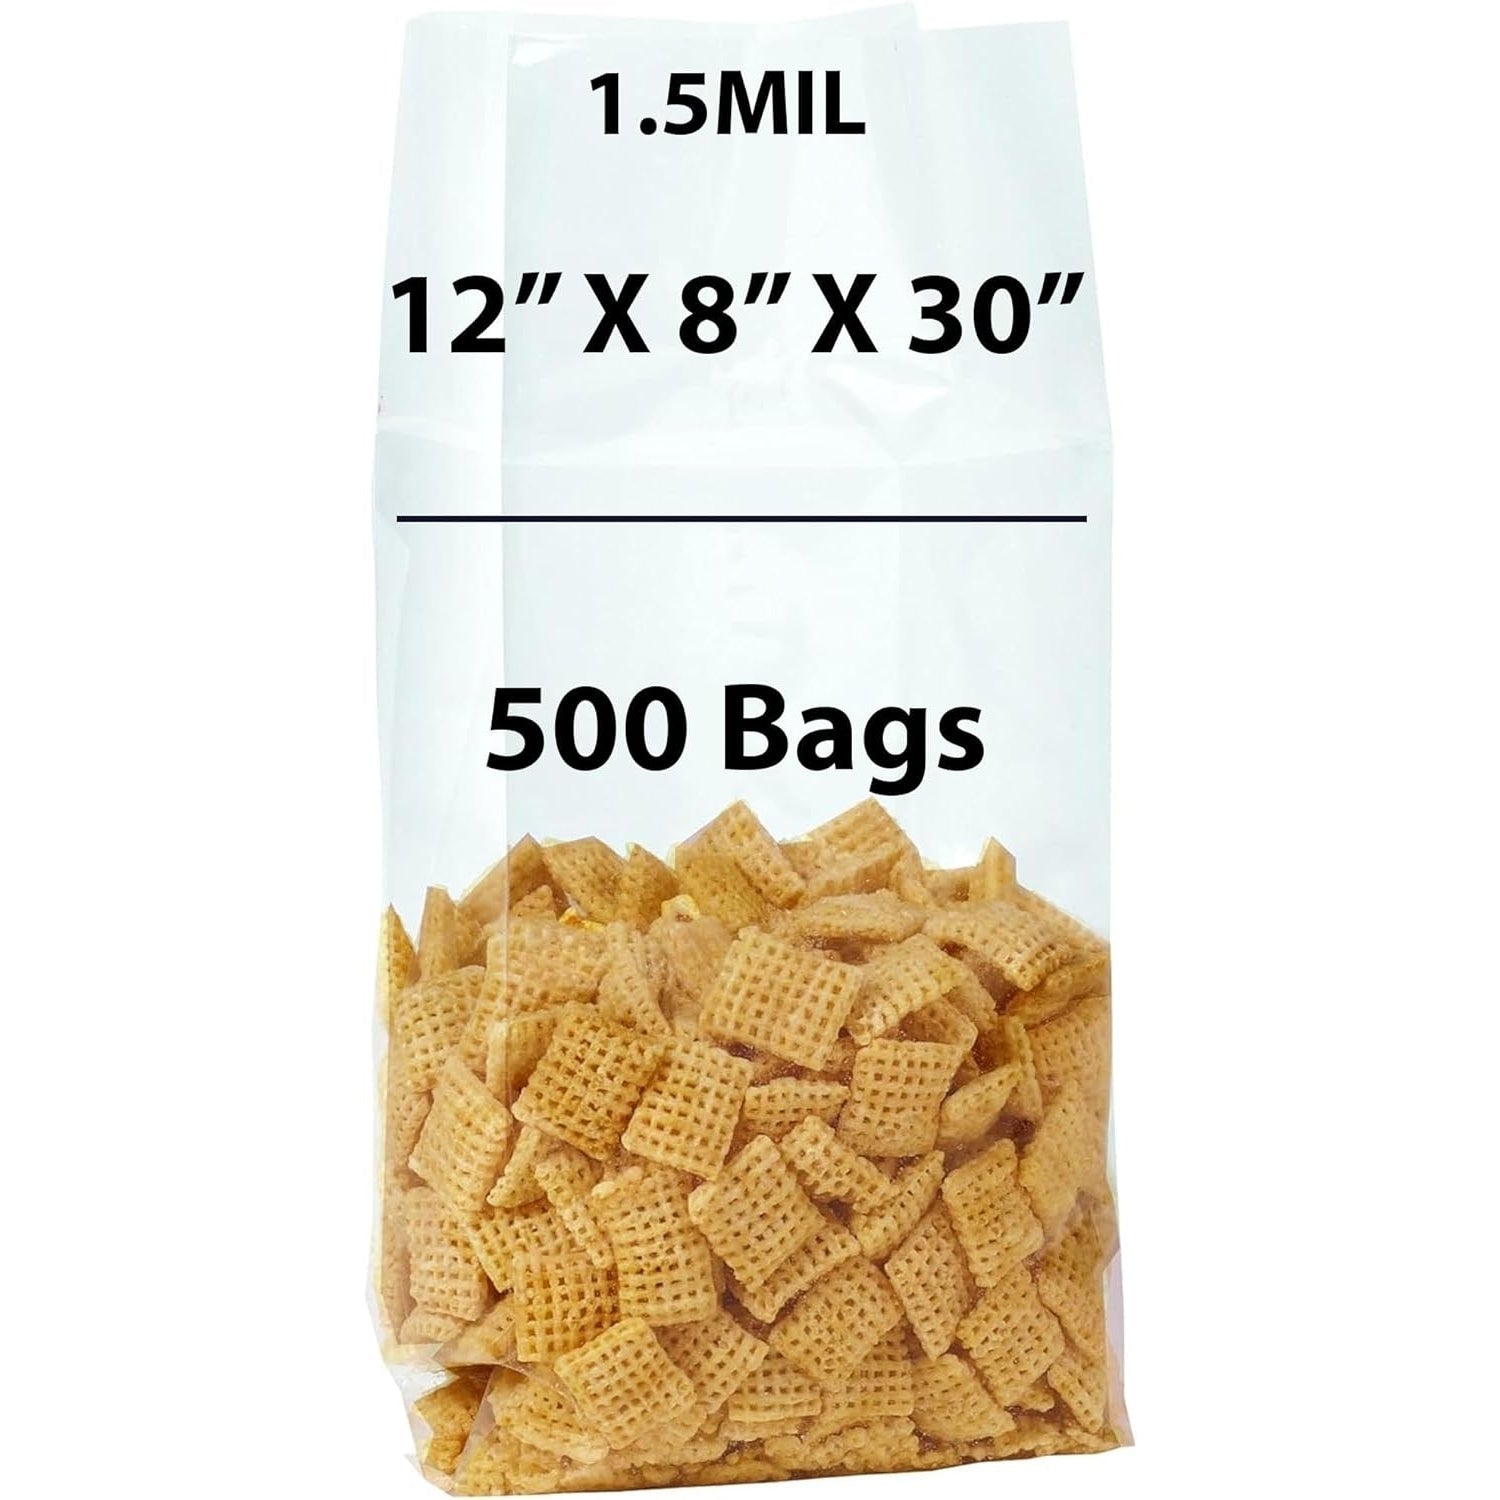 Gusseted Polypropylene Bags 1.5 Mil 12 inch X 8 inch X 30 inch Pack of 500 Bags